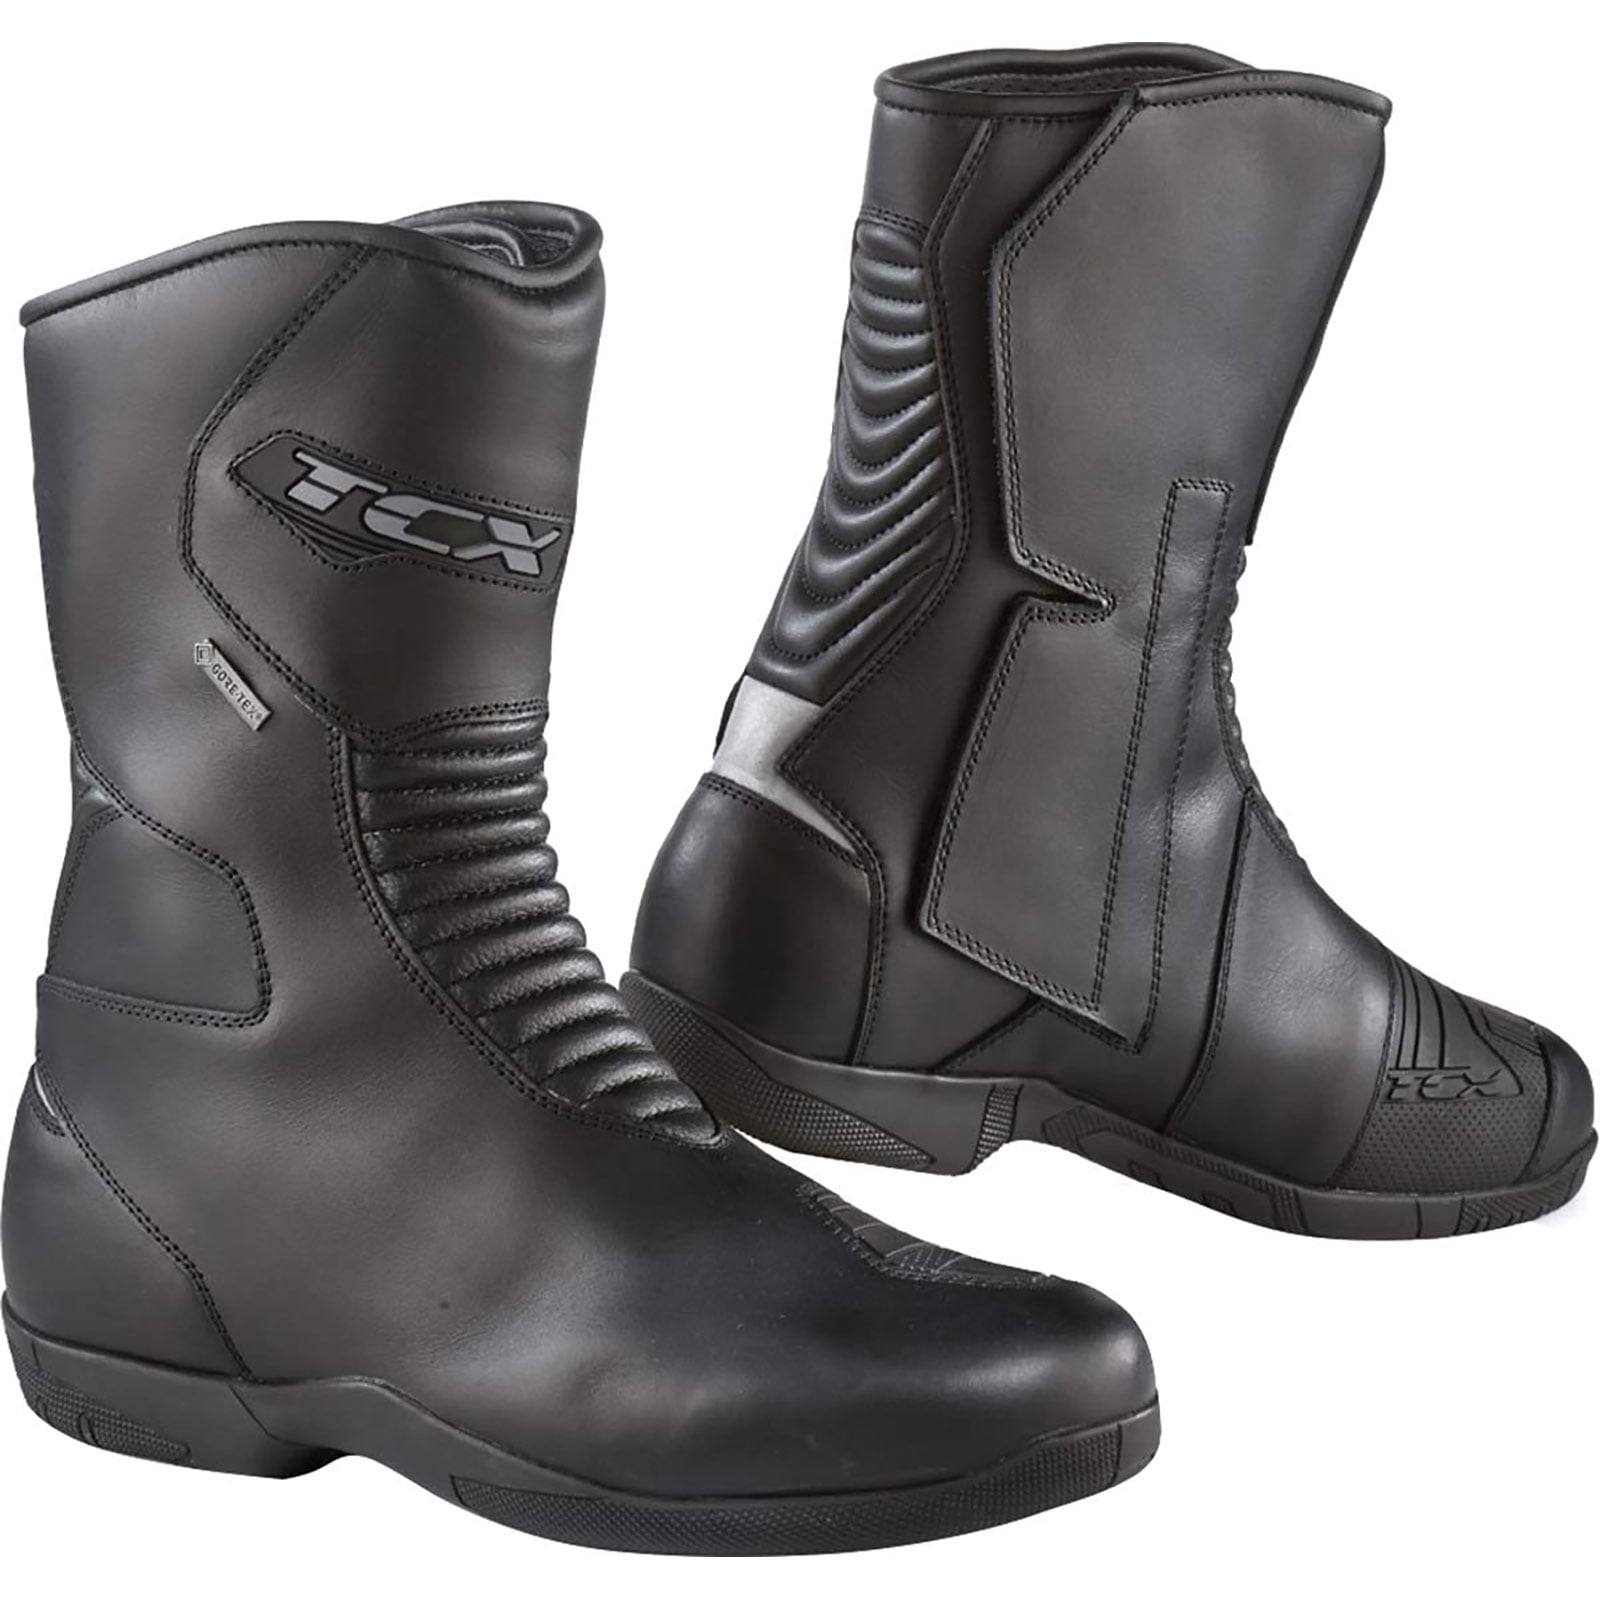 Black TCX Fuel Gore-Tex Waterproof Motorcycle Leather Touring Boots 